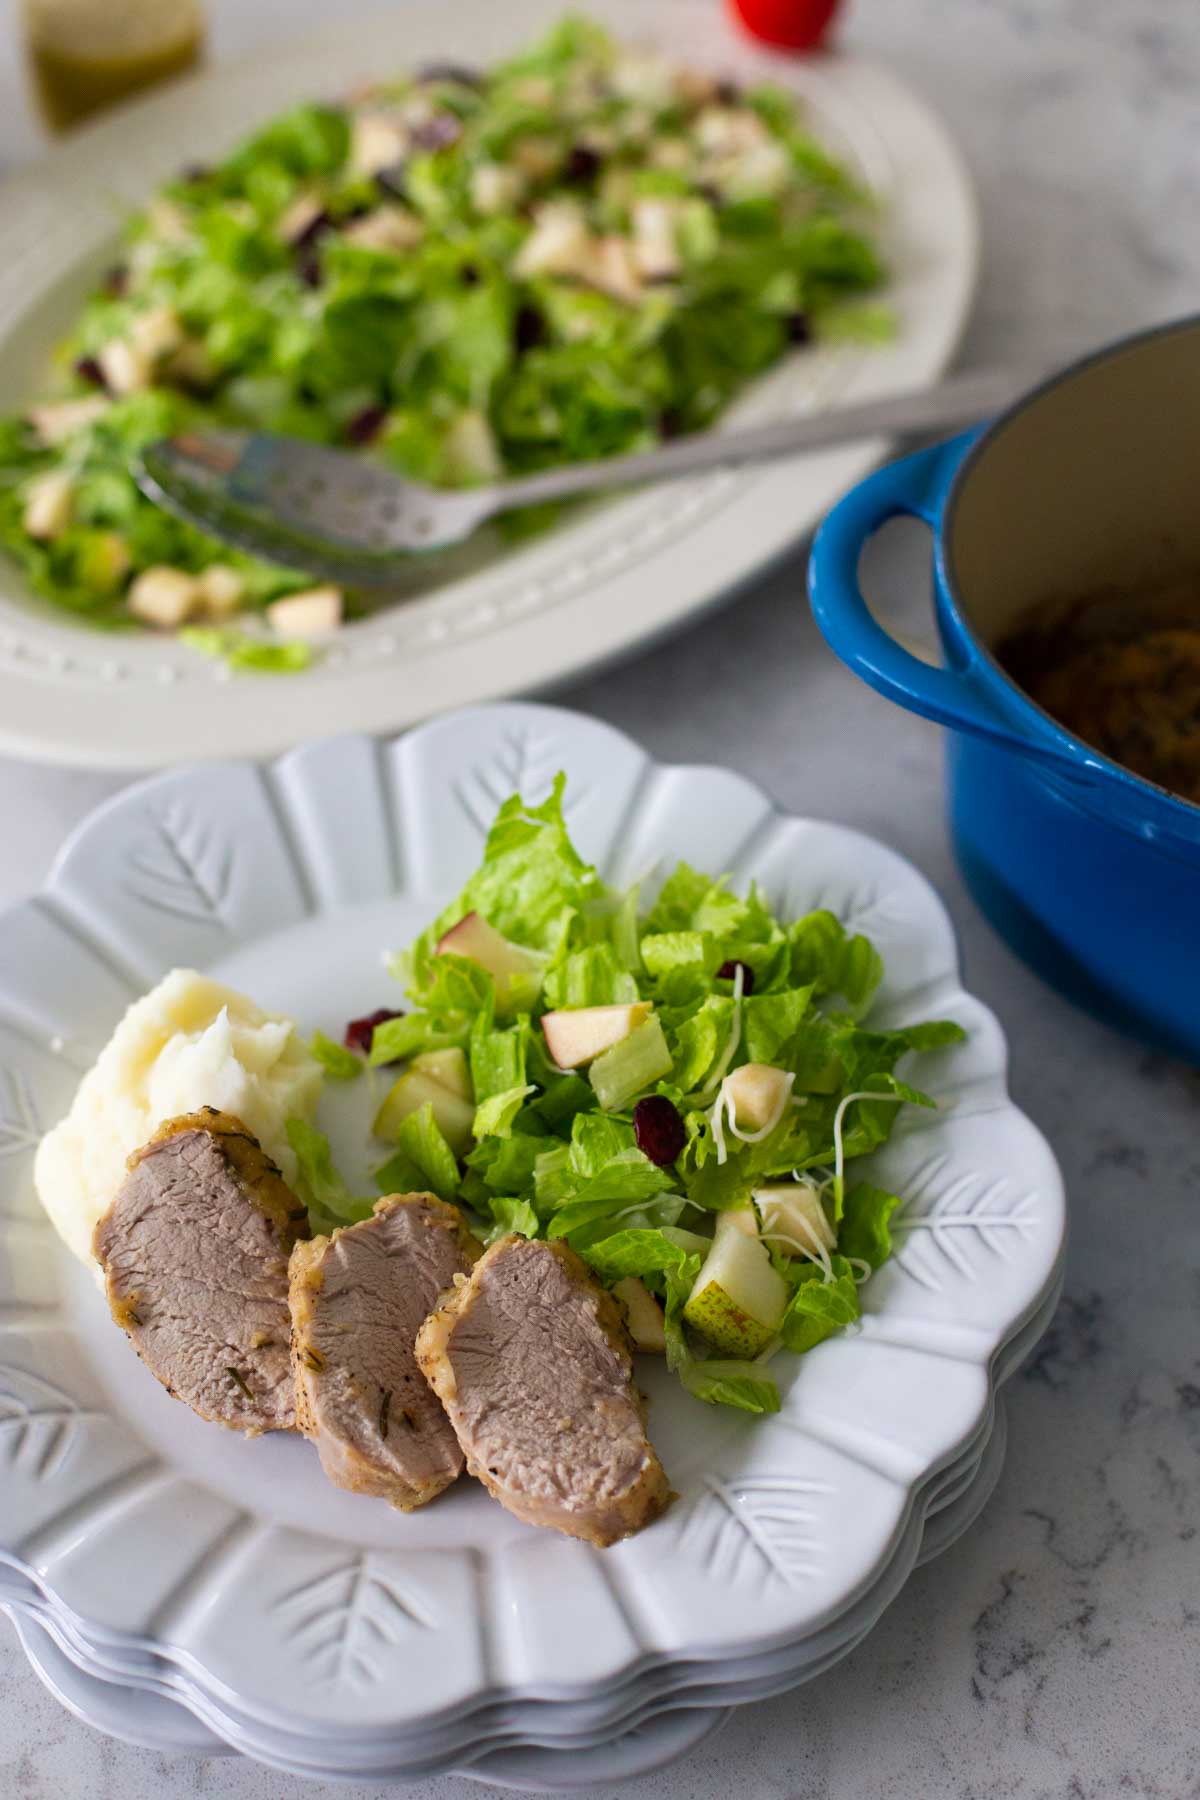 The pork has been sliced and served on a plate with a green salad and mashed potatoes.